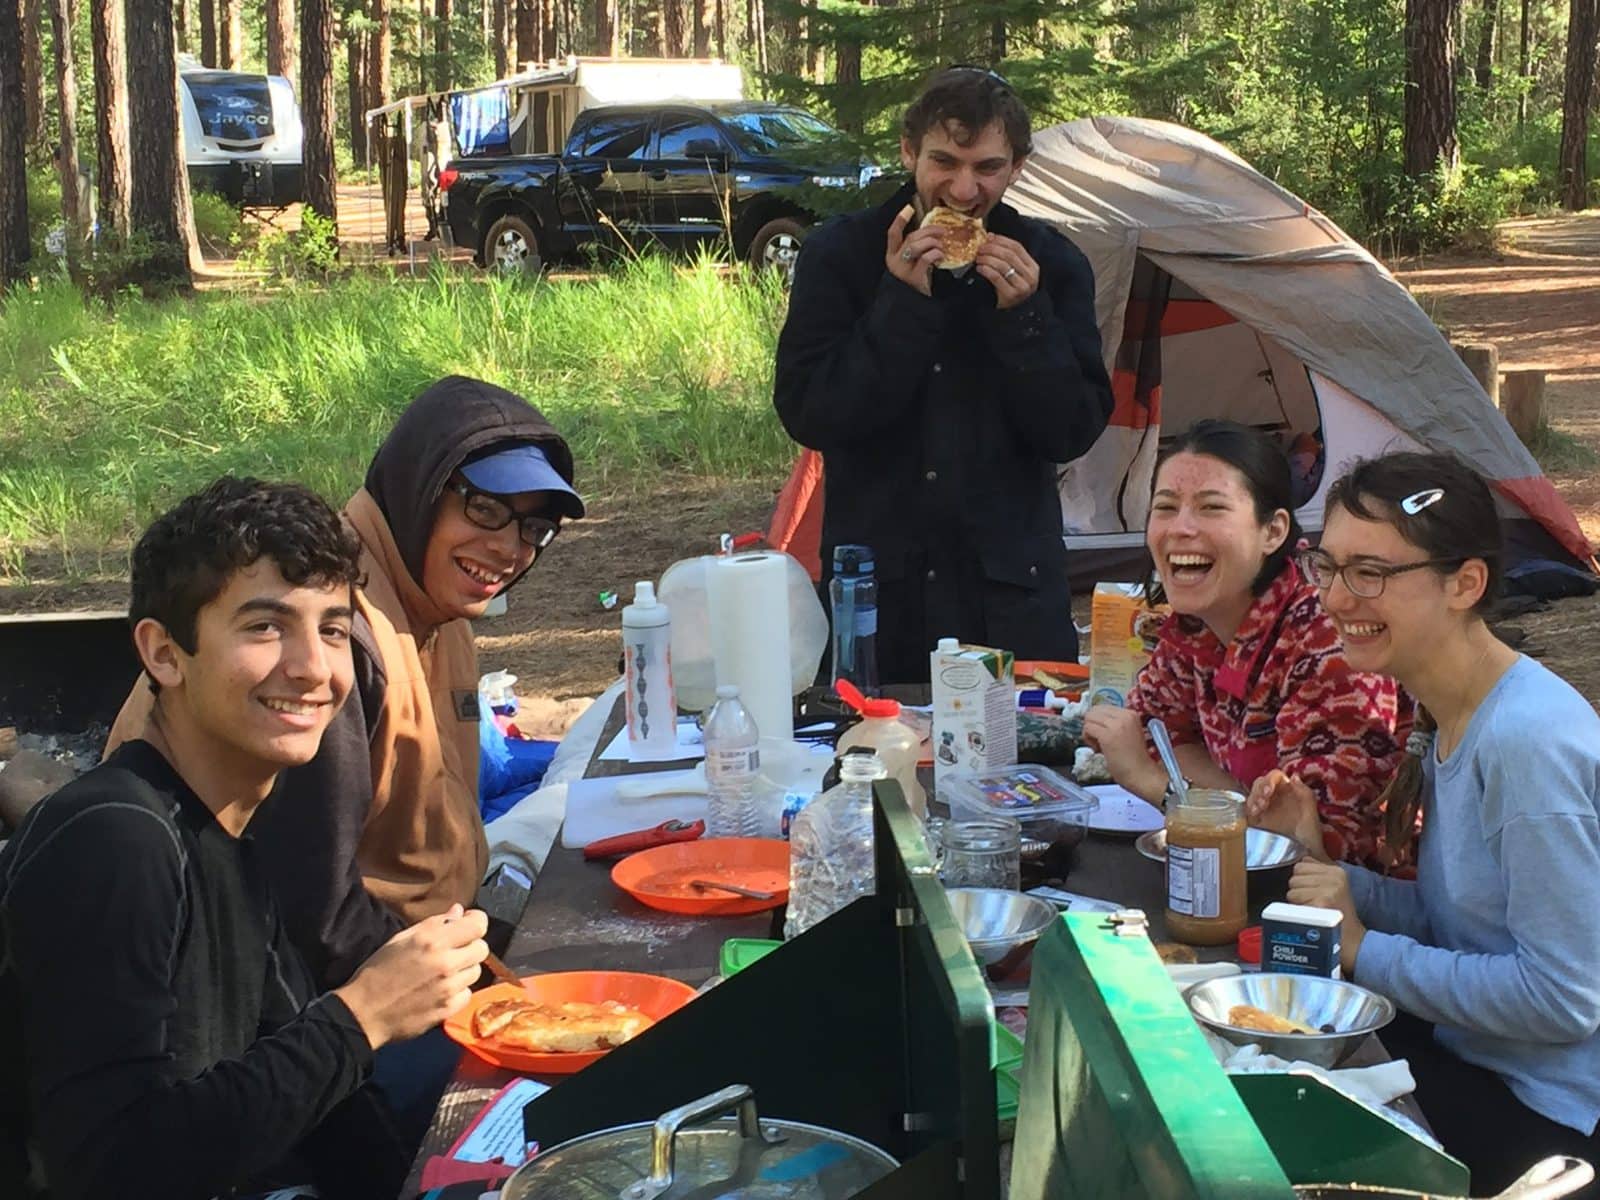 eating-at-the-campsite